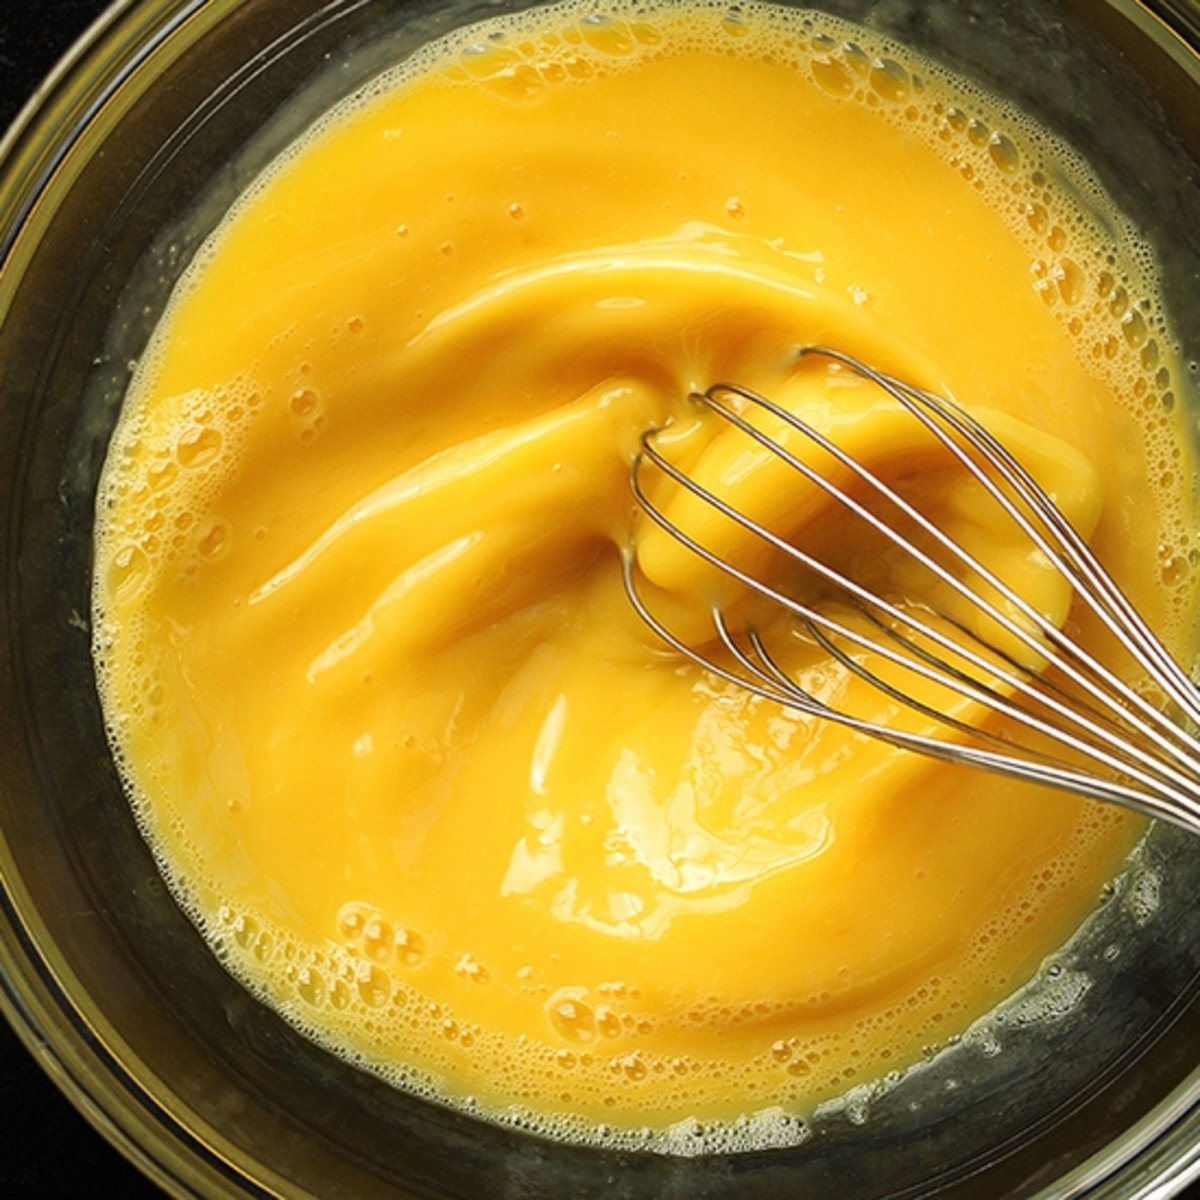 With an electric mixer, handheld mixer, or blender, beat egg yolks until thick and pale yellow.